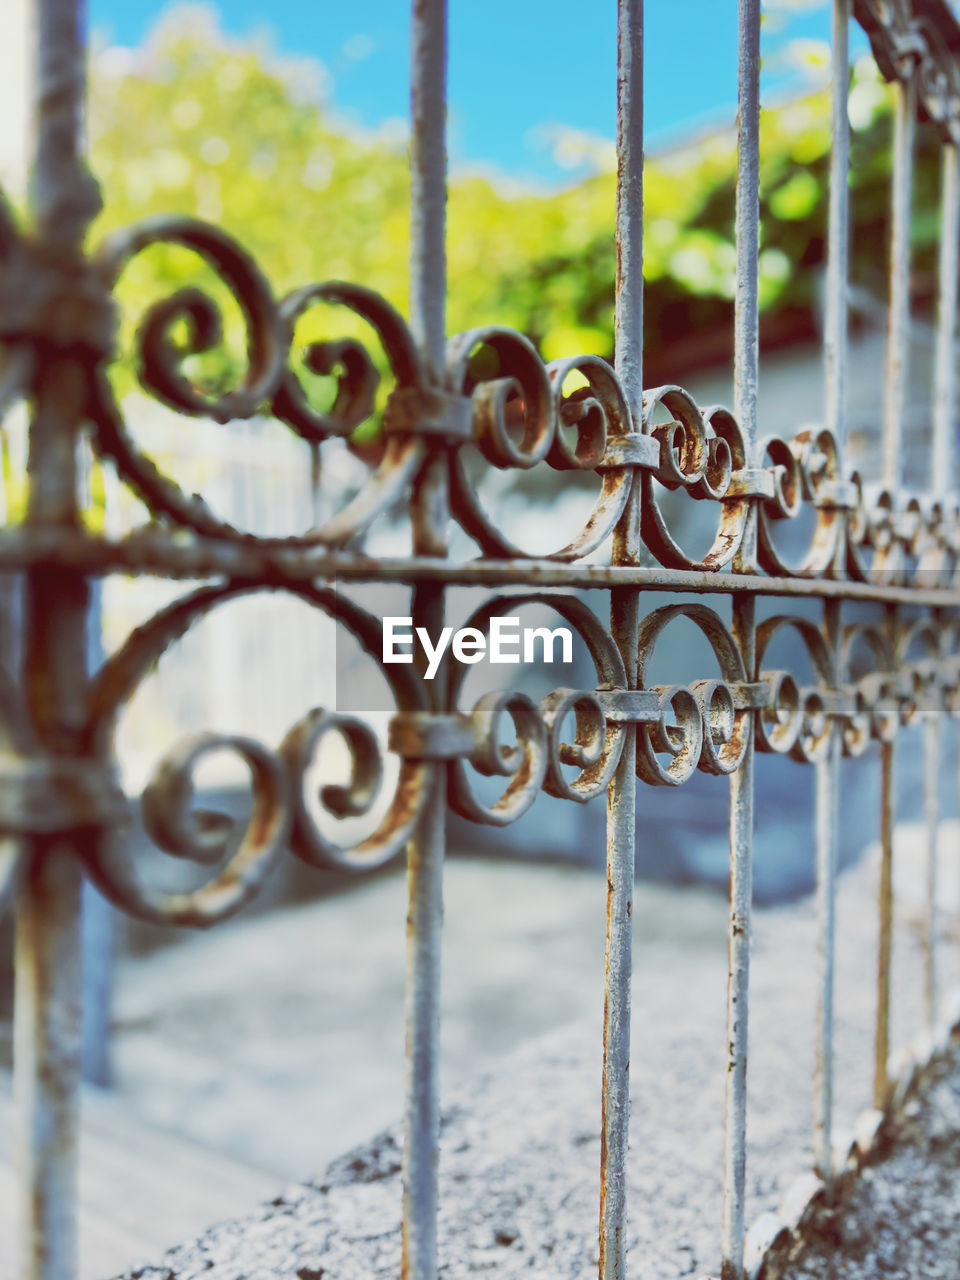 metal, iron, security, protection, gate, fence, wrought iron, no people, focus on foreground, day, architecture, close-up, rusty, outdoors, lock, railing, nature, closed, pattern, grid, metal grate, grate, wire, outdoor structure, chain, wood